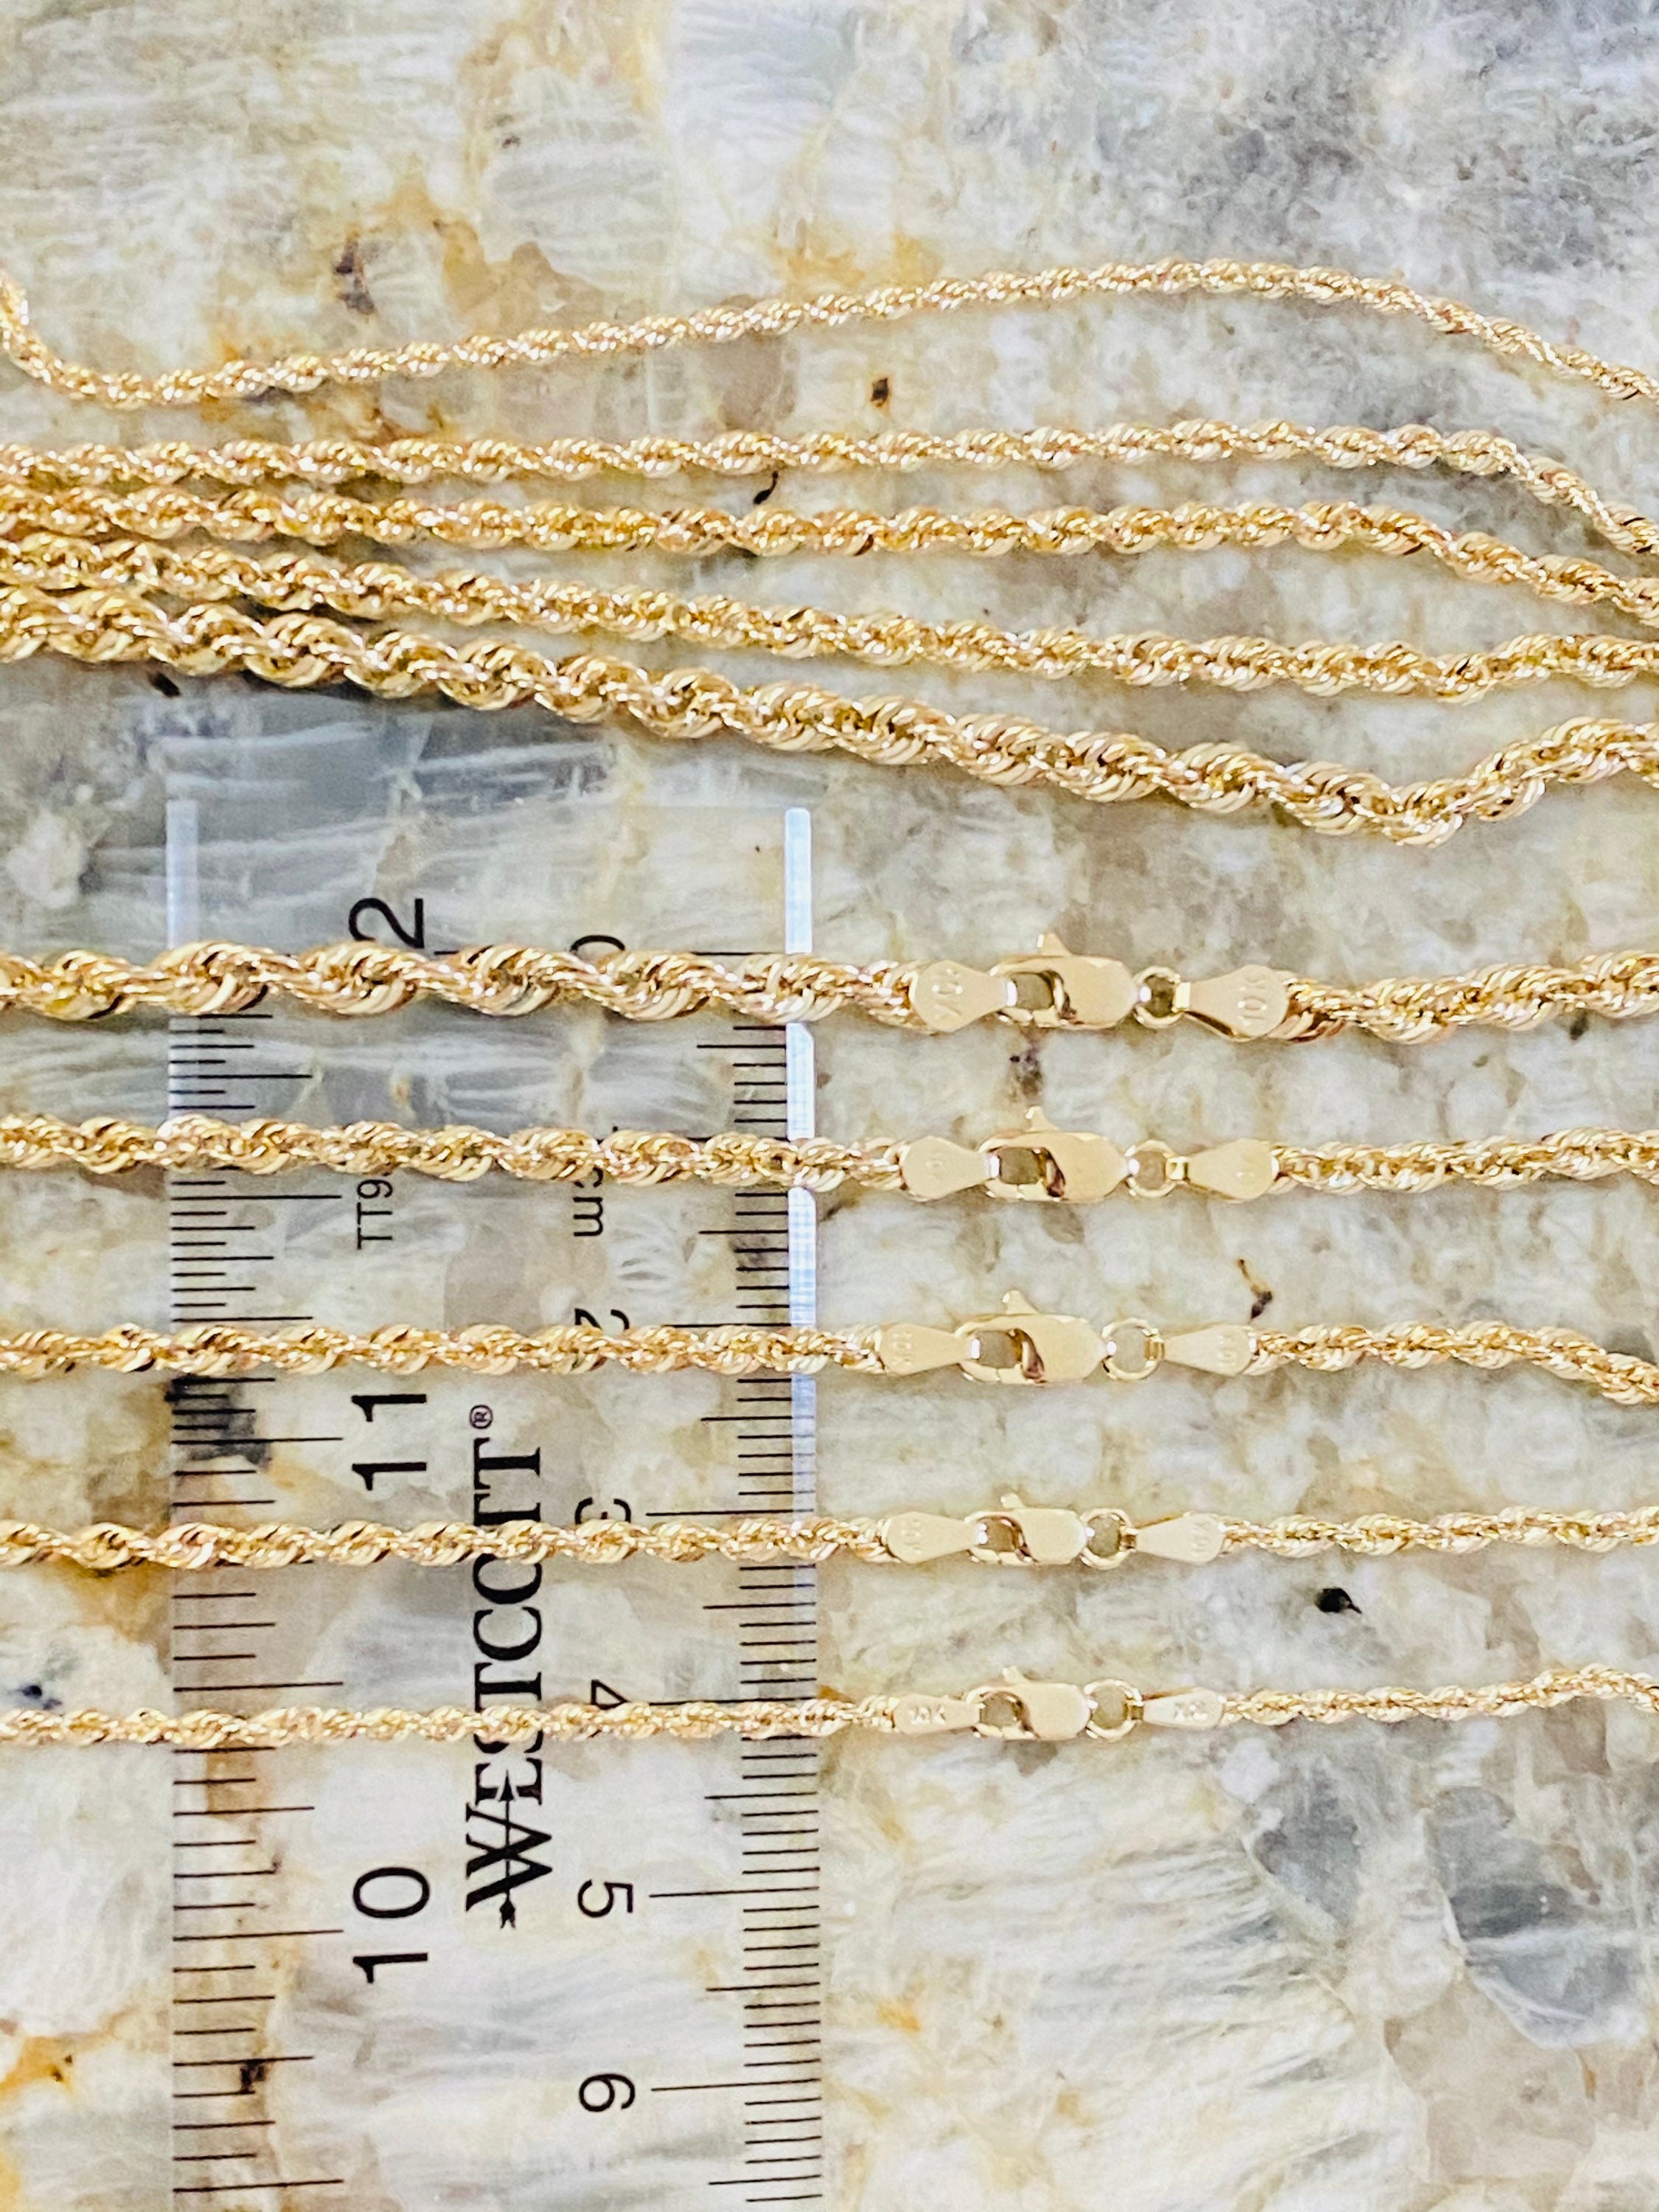 14K Gold Thin 1-1.5mm Rope Chain Cable Choker Necklace 15-18 18 inch - 1.5 mm